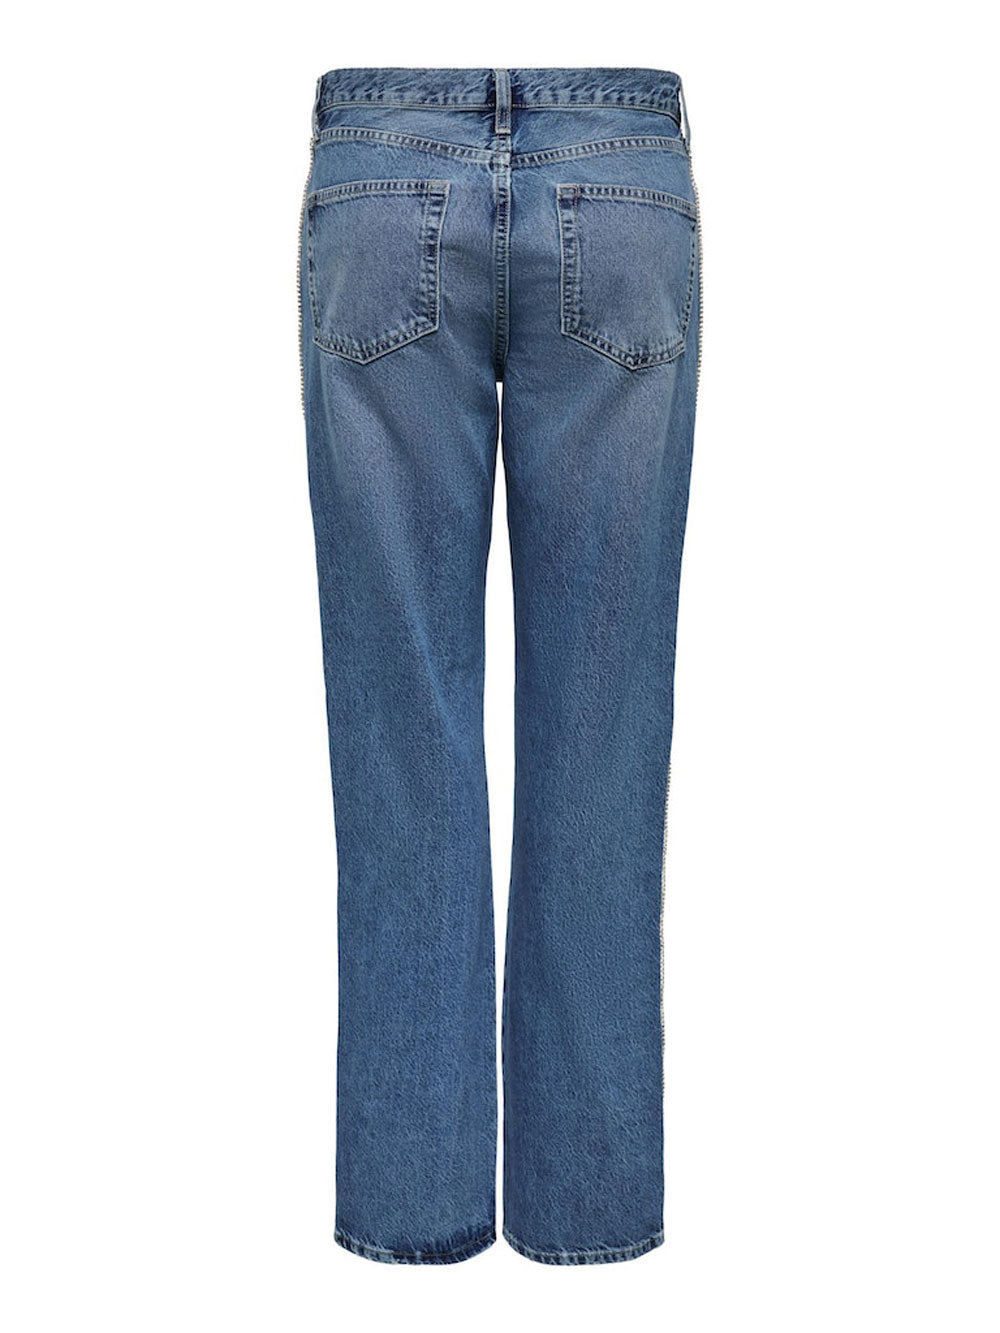 ONLY Only Riley jeans da donna gamba dritta